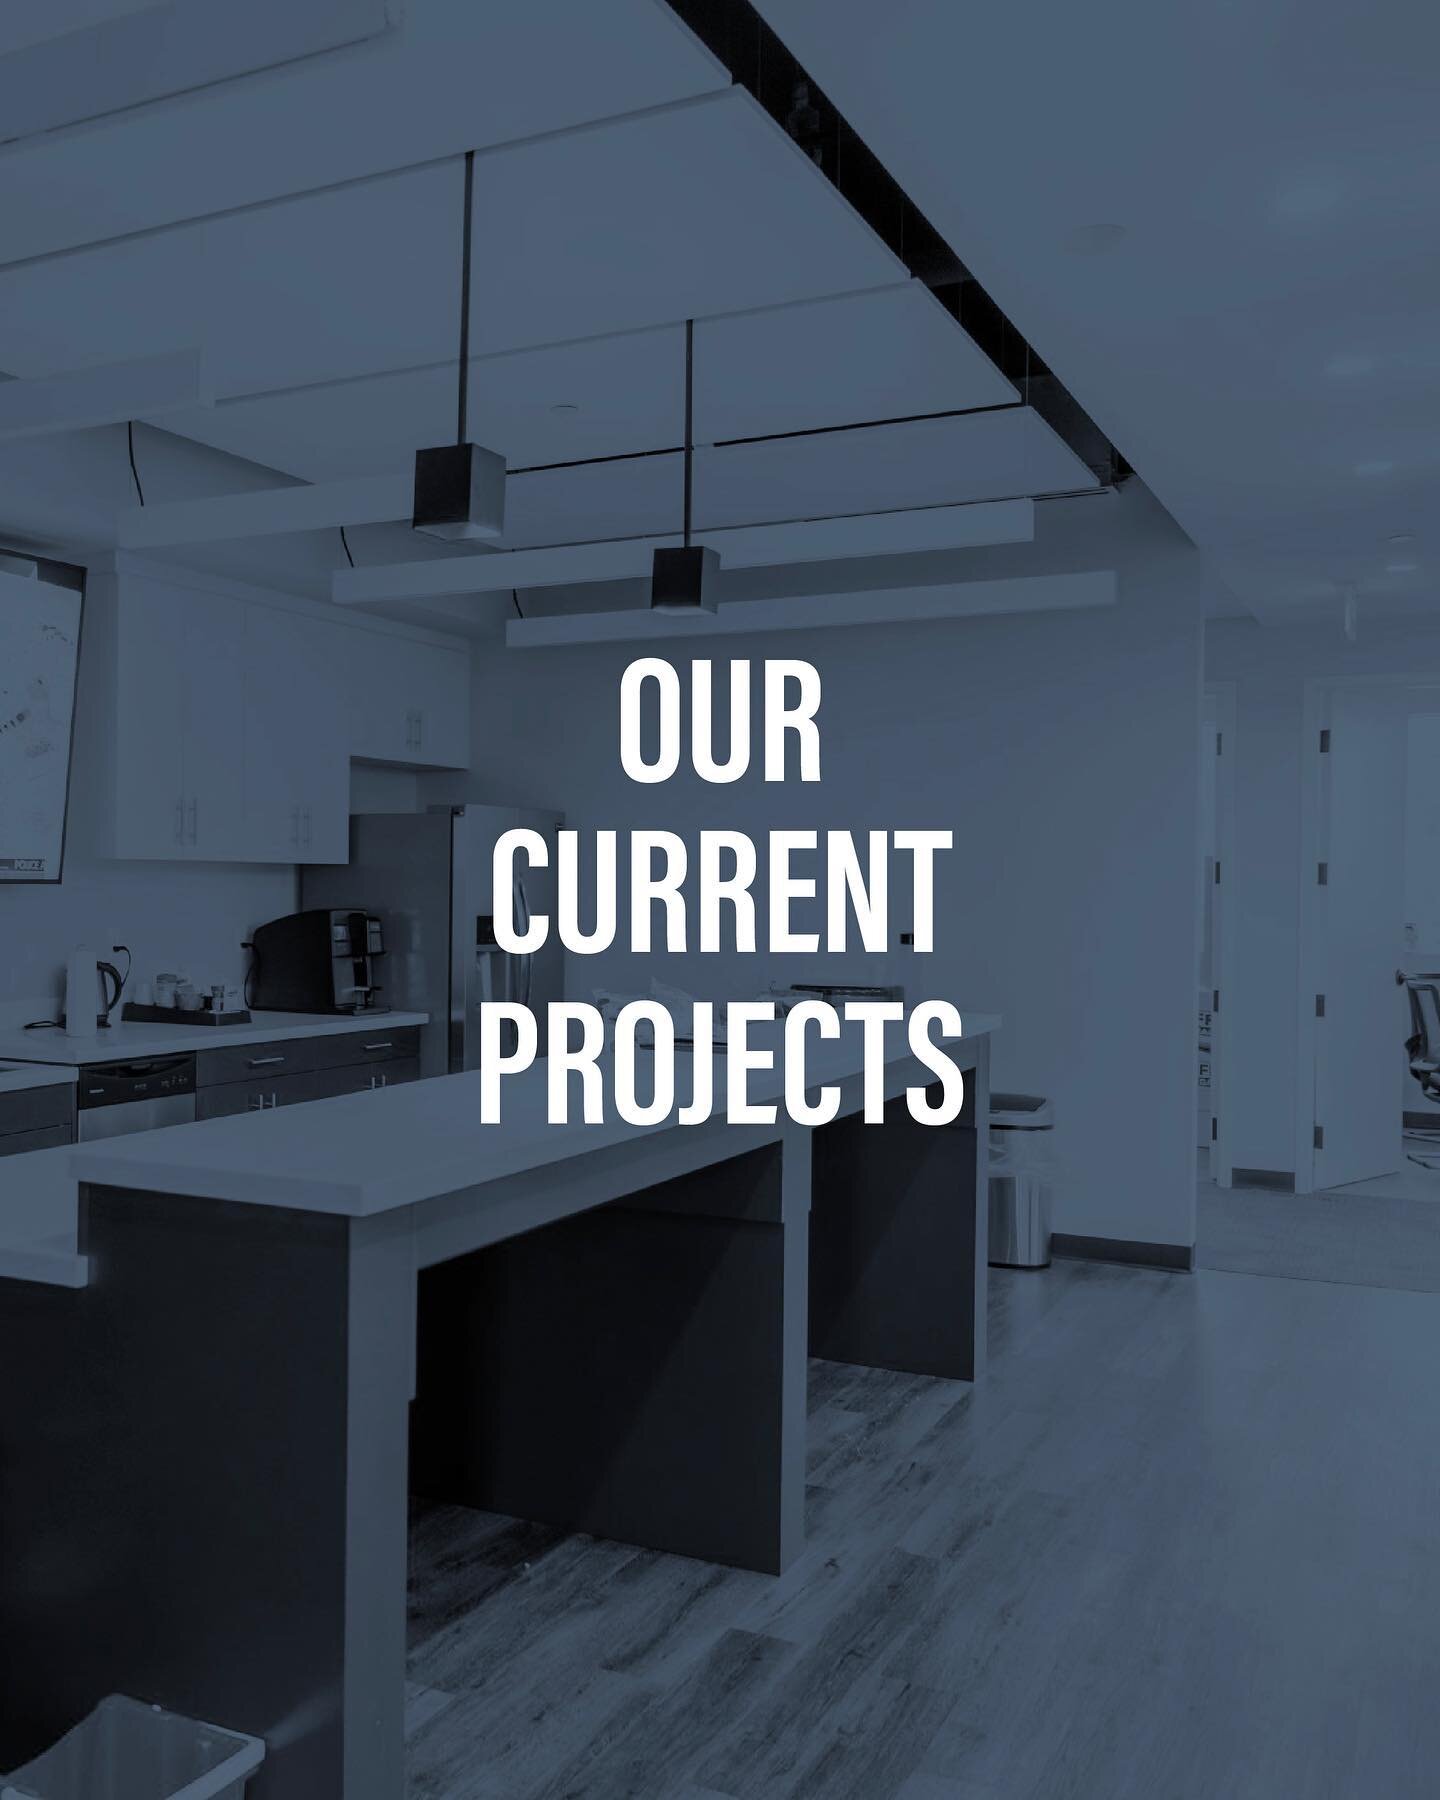 We're excited to share updates on some of our current projects! From calming yoga studios to inspiring youth designs, we're bringing our clients' visions to life. 

Have a look and let us know which project you're most excited about!

@bgcofbroward, 